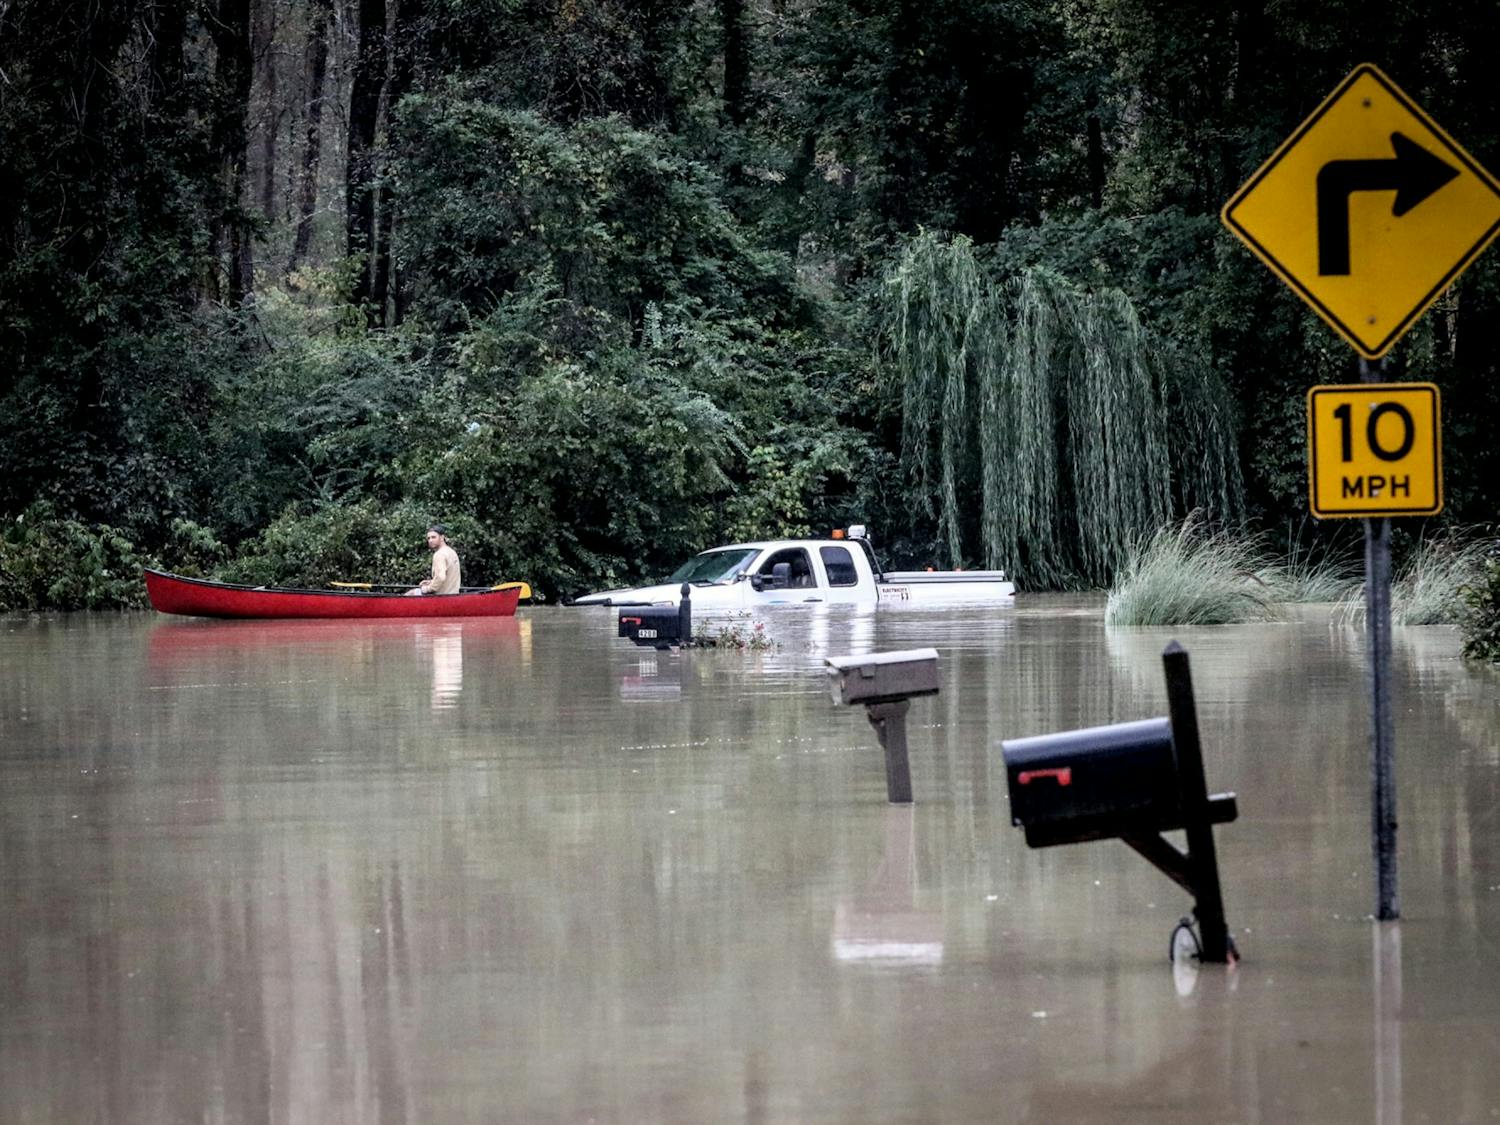 Rescue crews from across the country work to help those in need after rain and flood water ravaged the Columbia, South Carolina, area on Oct. 4, 2015.